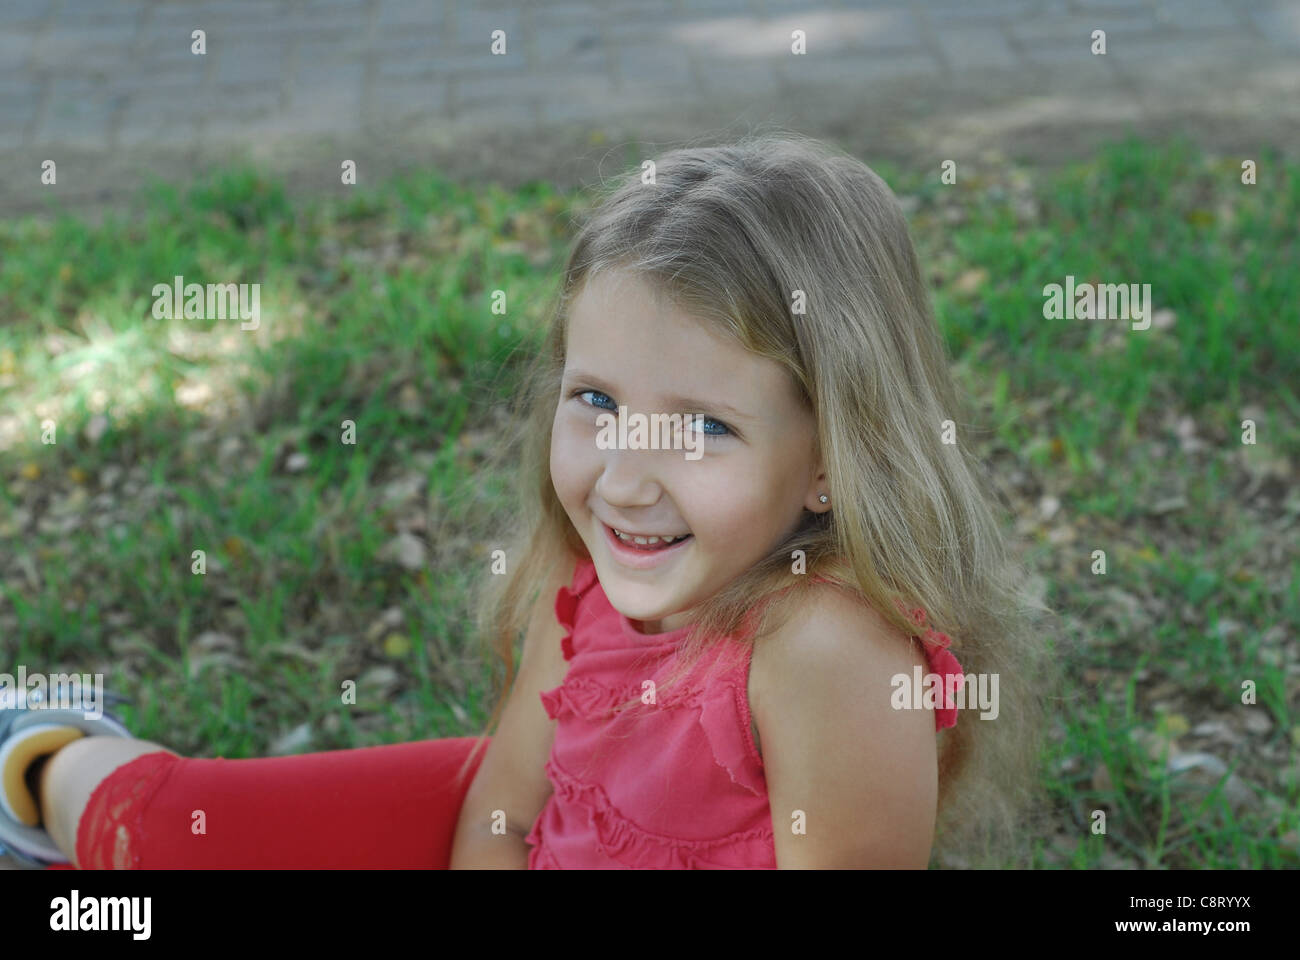 Portrait of laughing girl in red dress against a background of grass Stock Photo